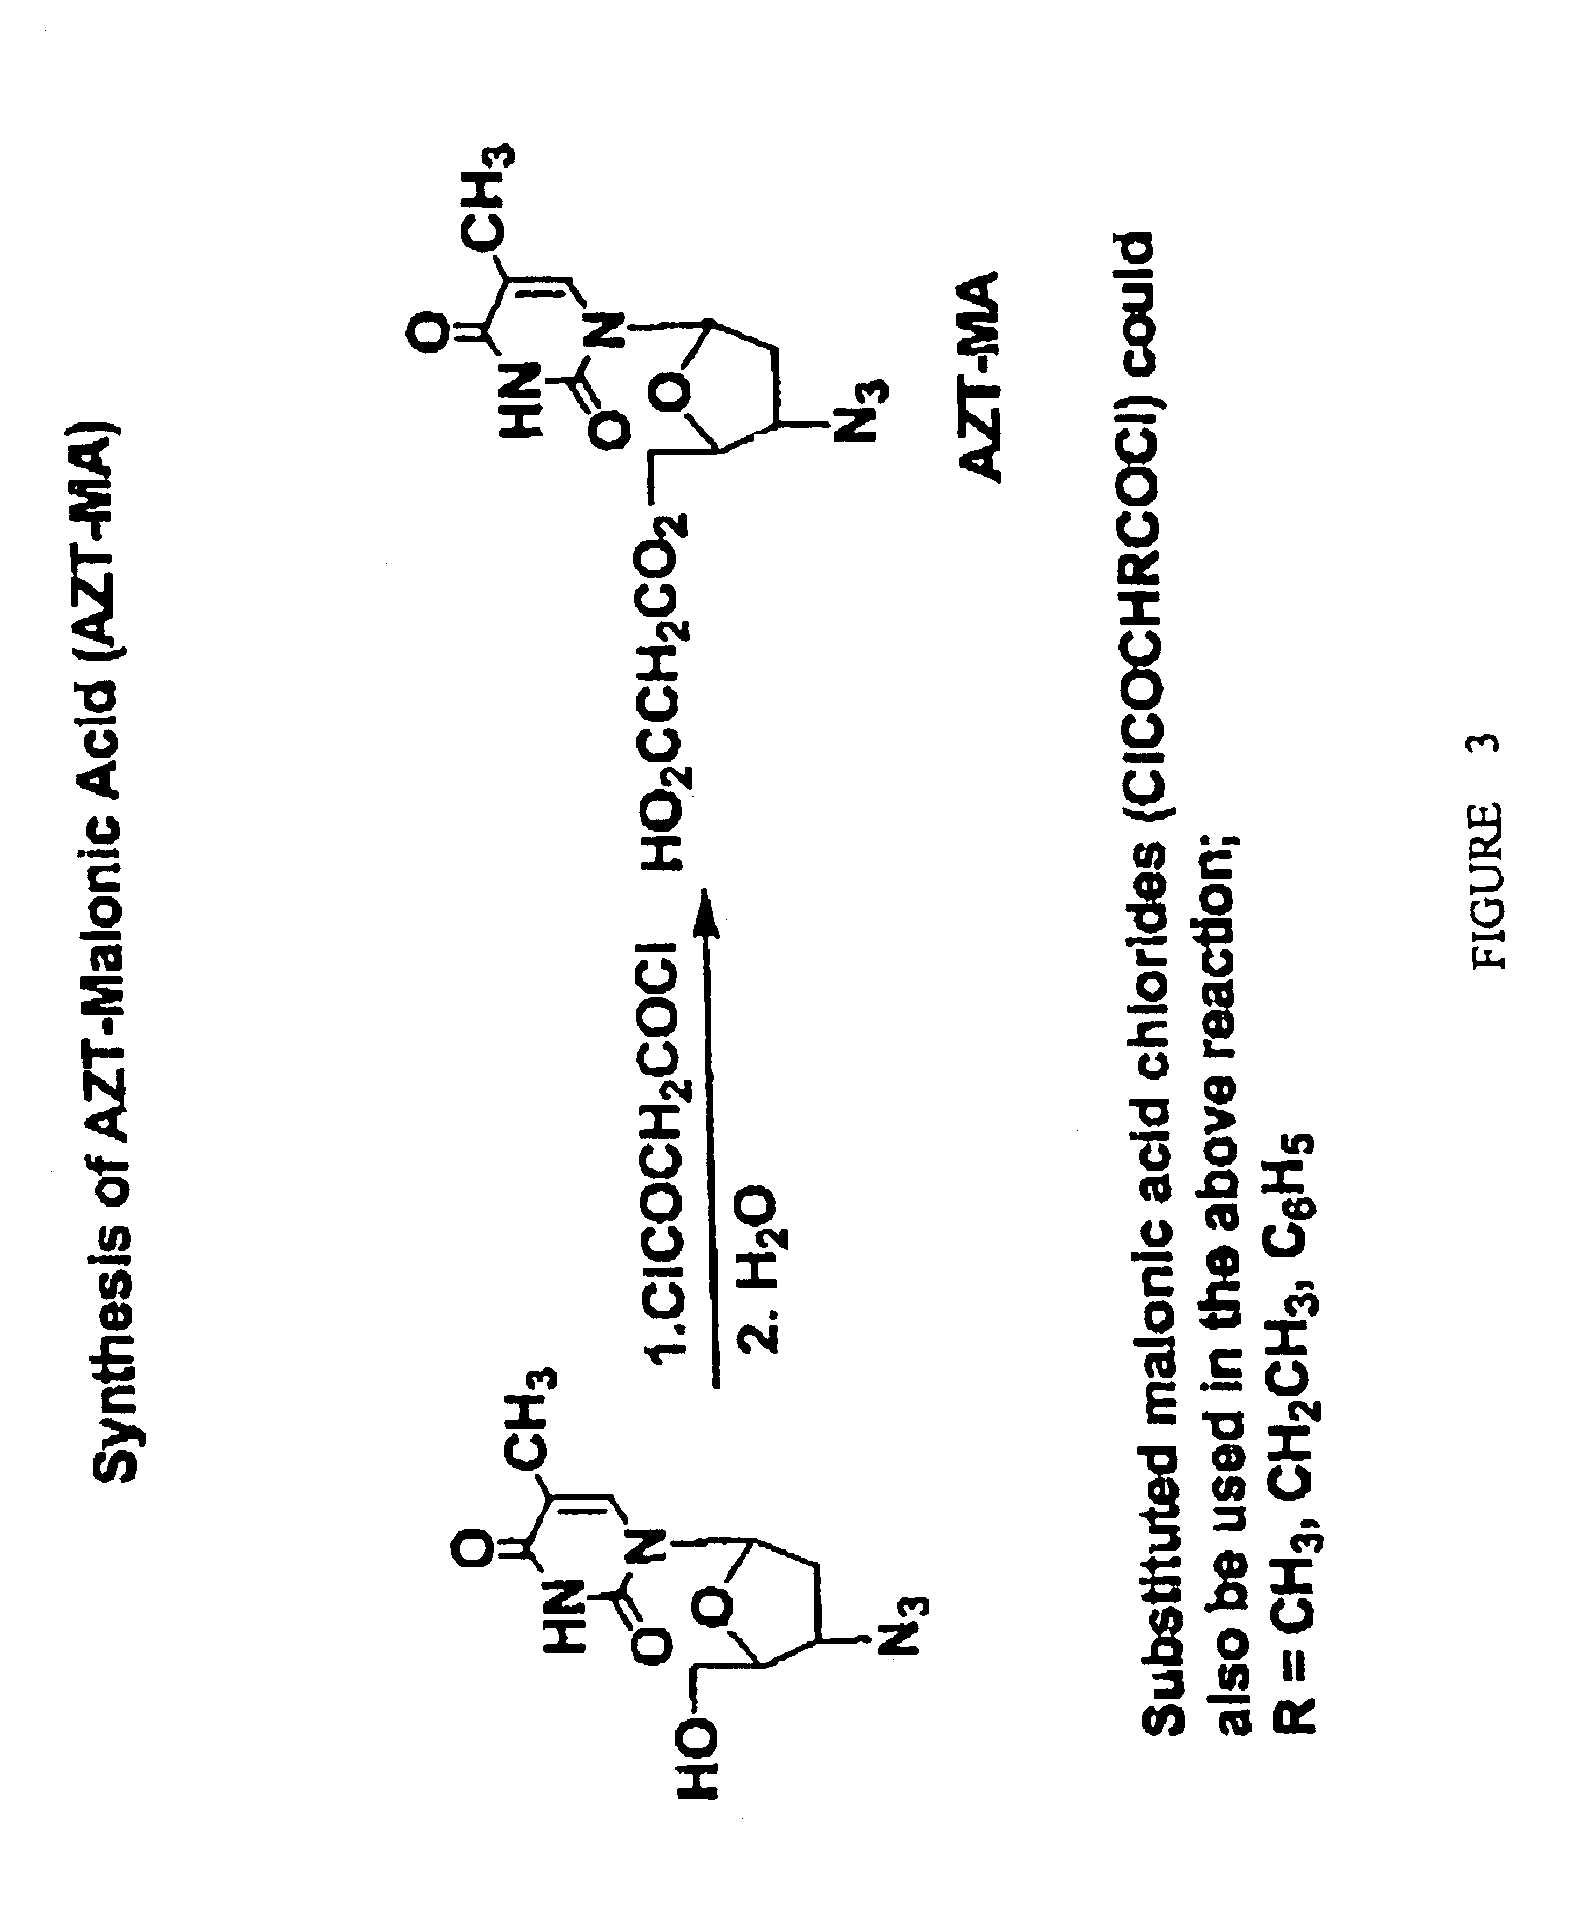 Compositions and methods of double-targeting virus infections and cancer cells